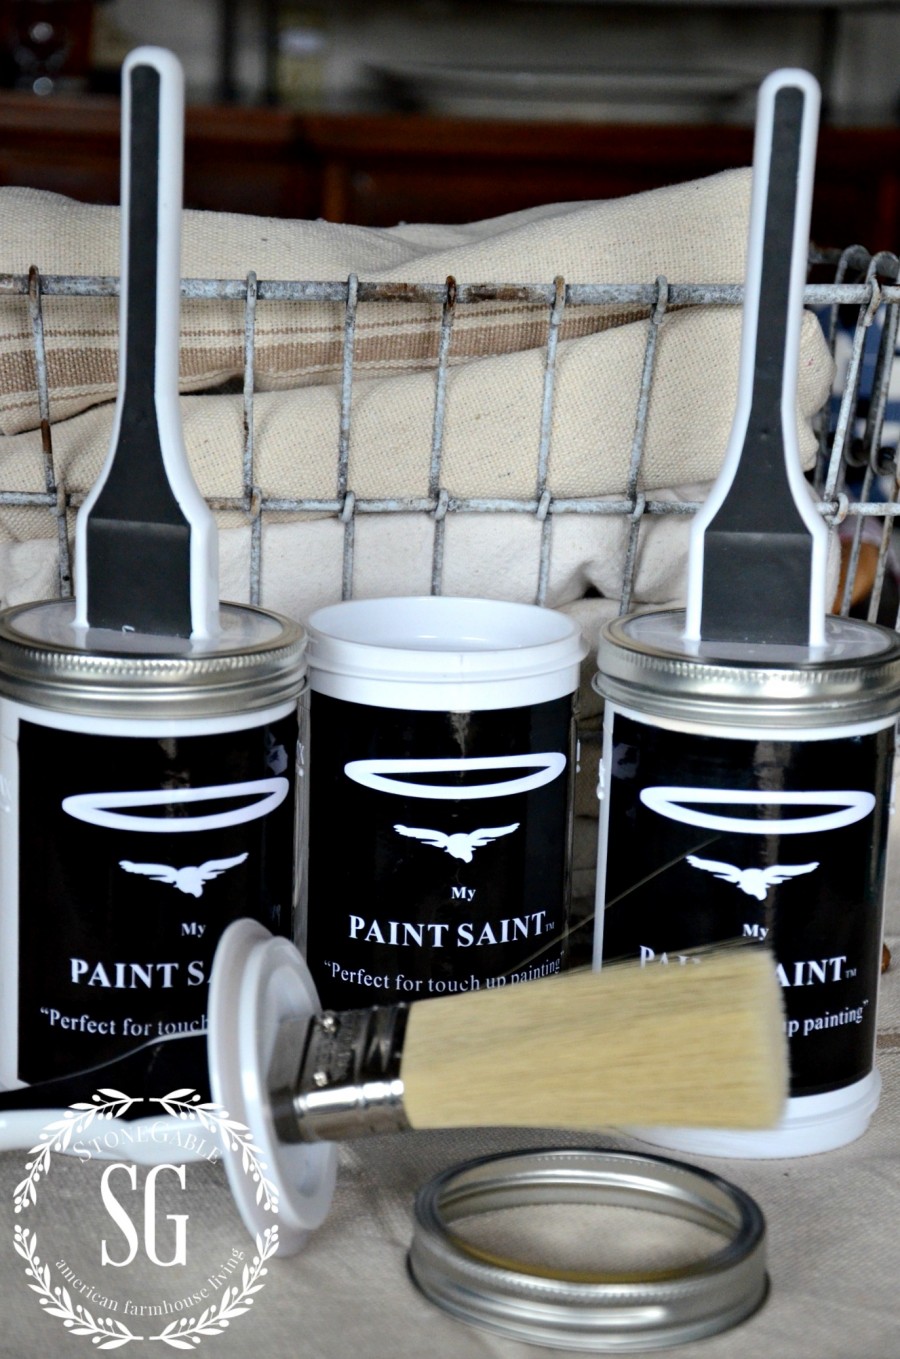 6 MUST HAVE THINGS TO PAINT A ROOM LIKE A PRO-paint saint-stonegableblog.com